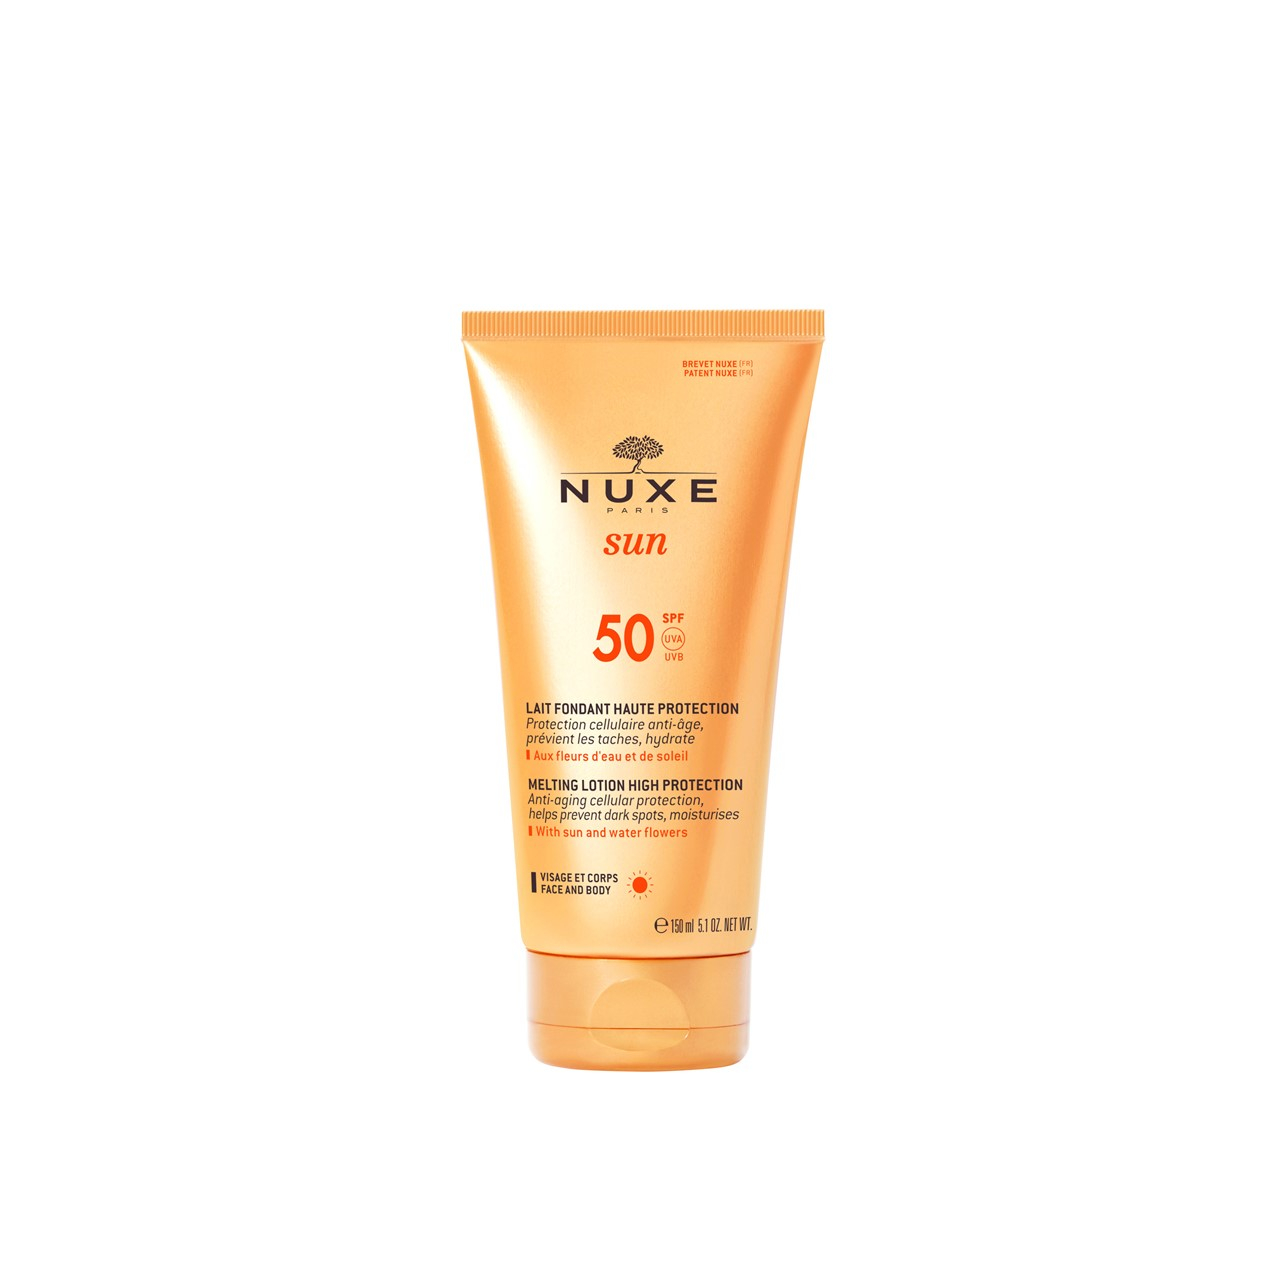 NUXE Sun Melting Lotion High Protection SPF50 150ml (5.07fl oz)